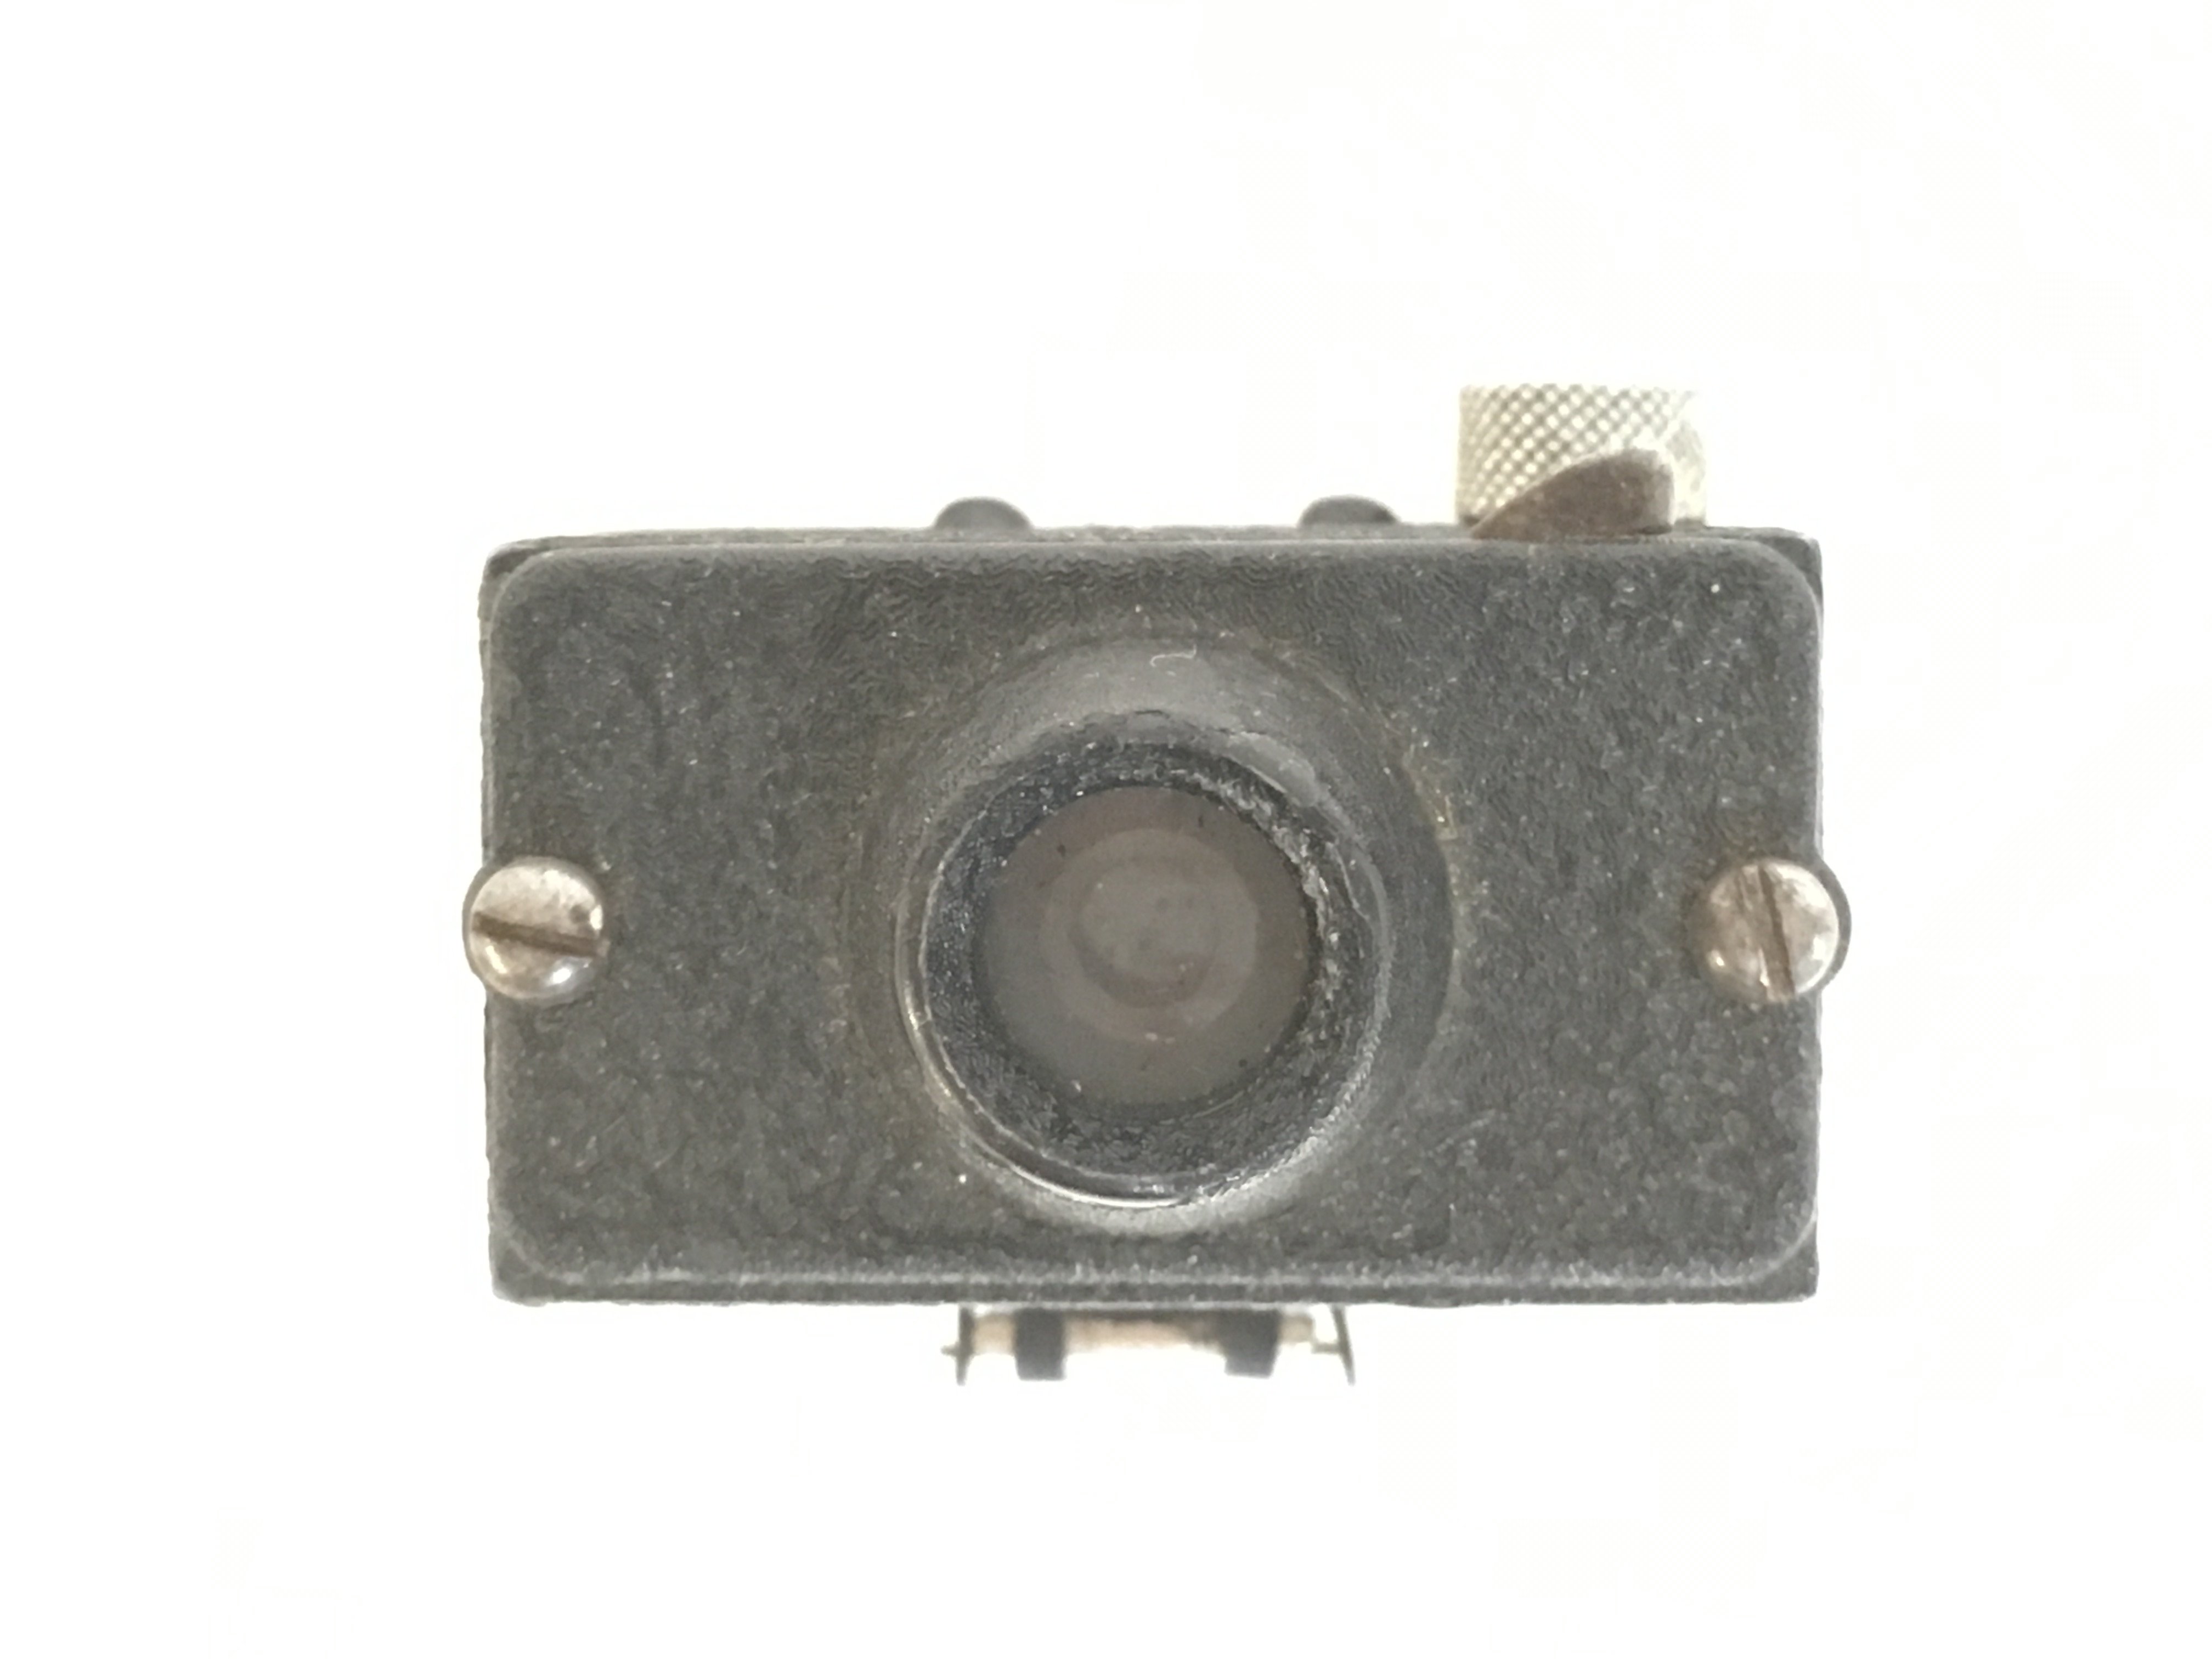 A micro 8mm camera. This lot cannot be posted